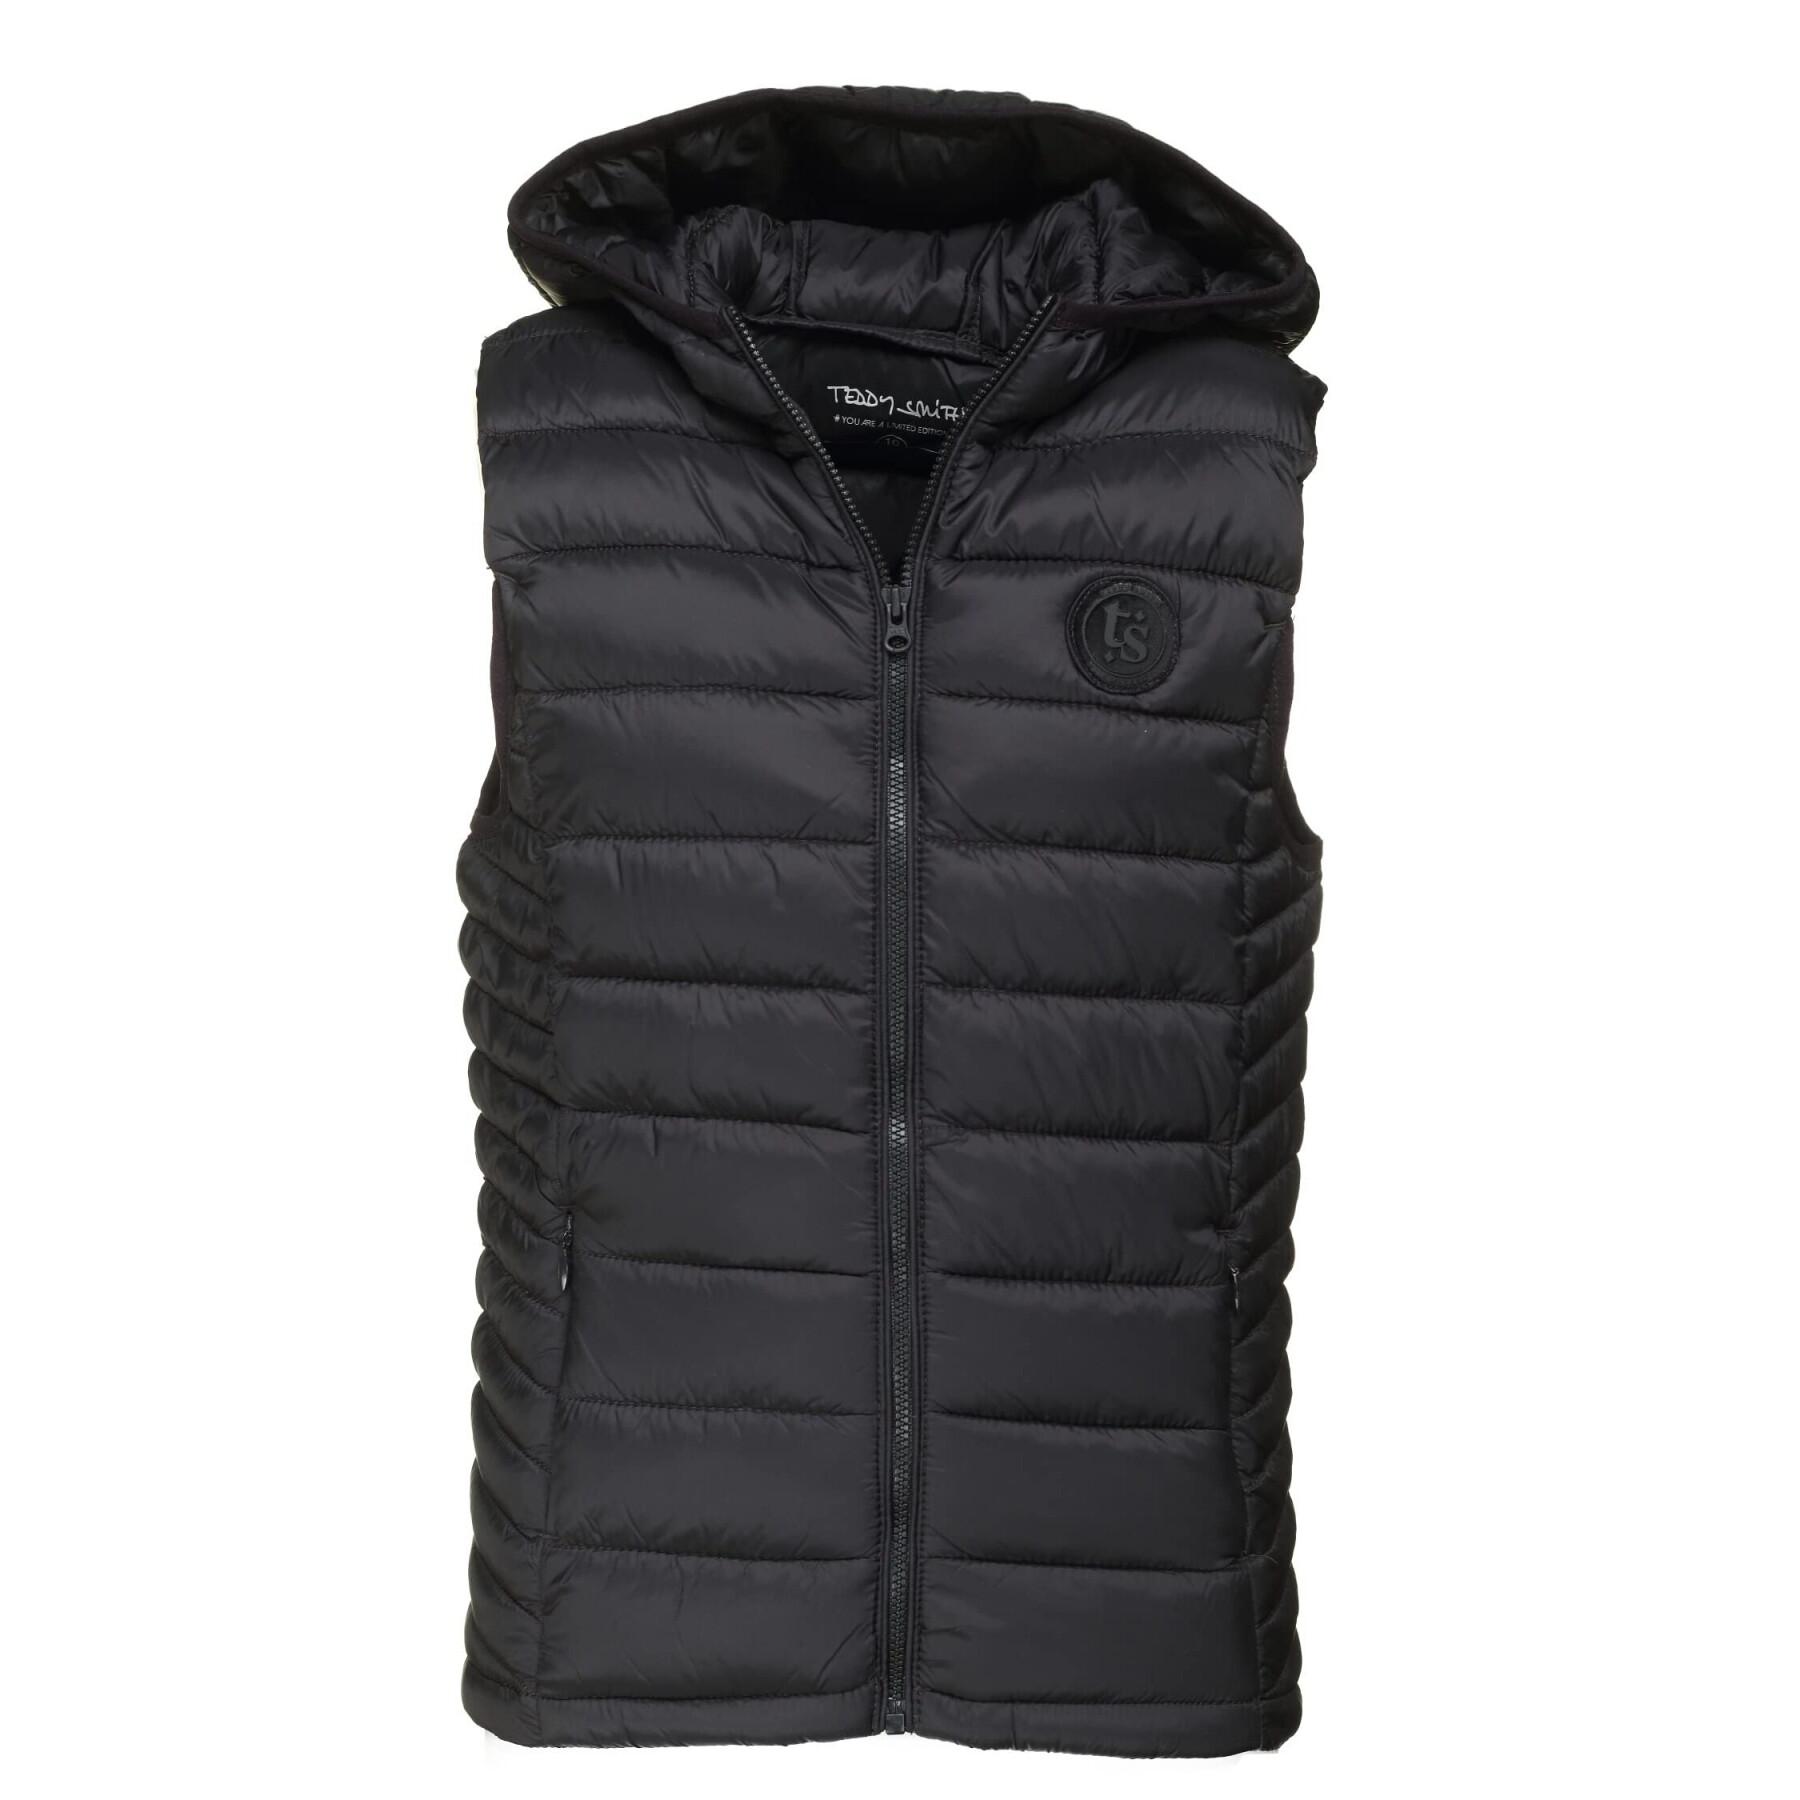 Hooded Puffer Jacket Teddy Smith Terry 2 G